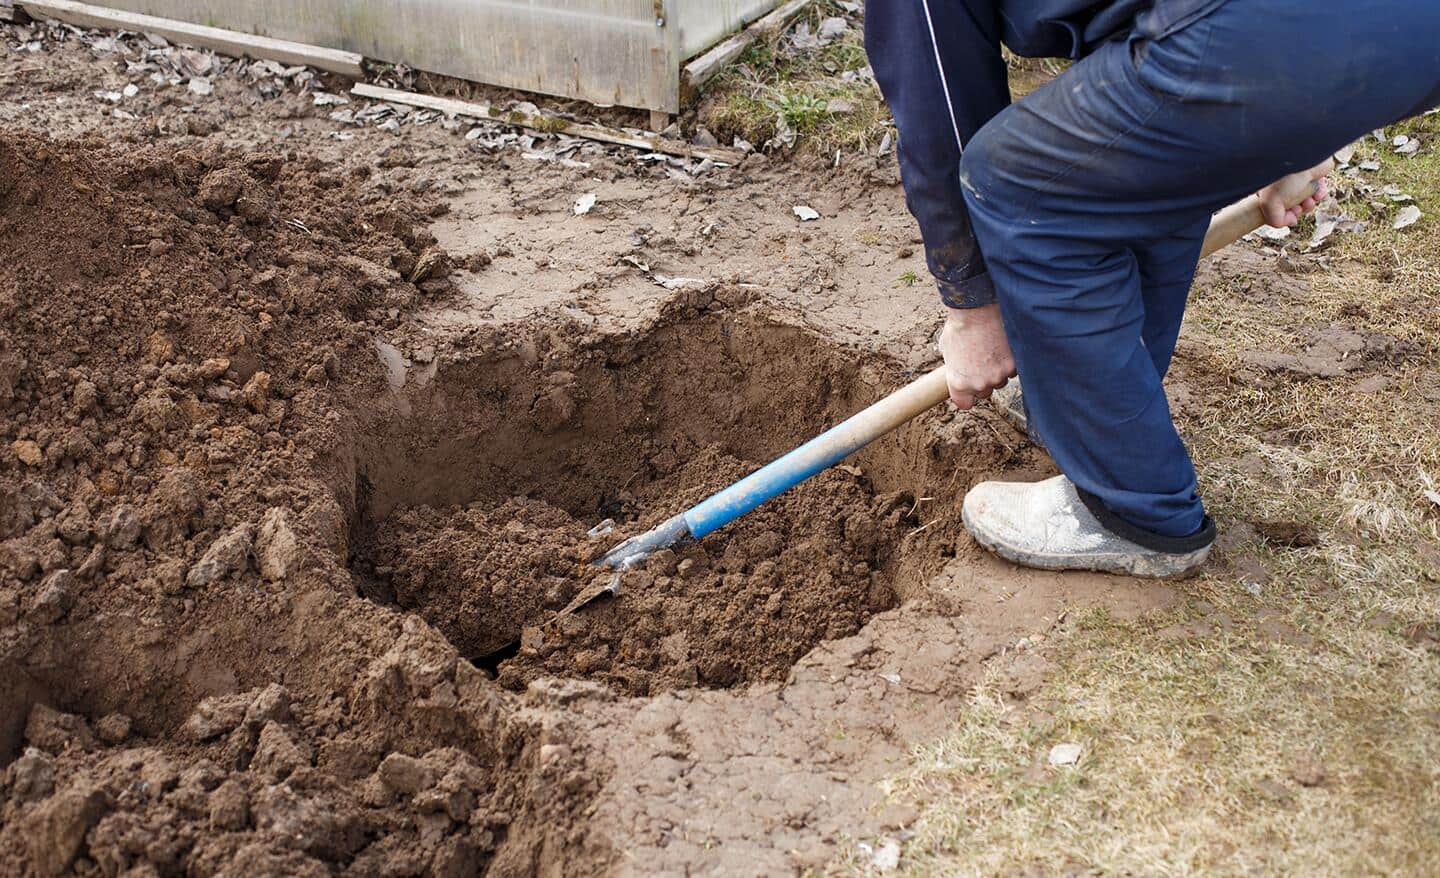 Gardener uses a shovel to dig a hole to plant a fruit tree